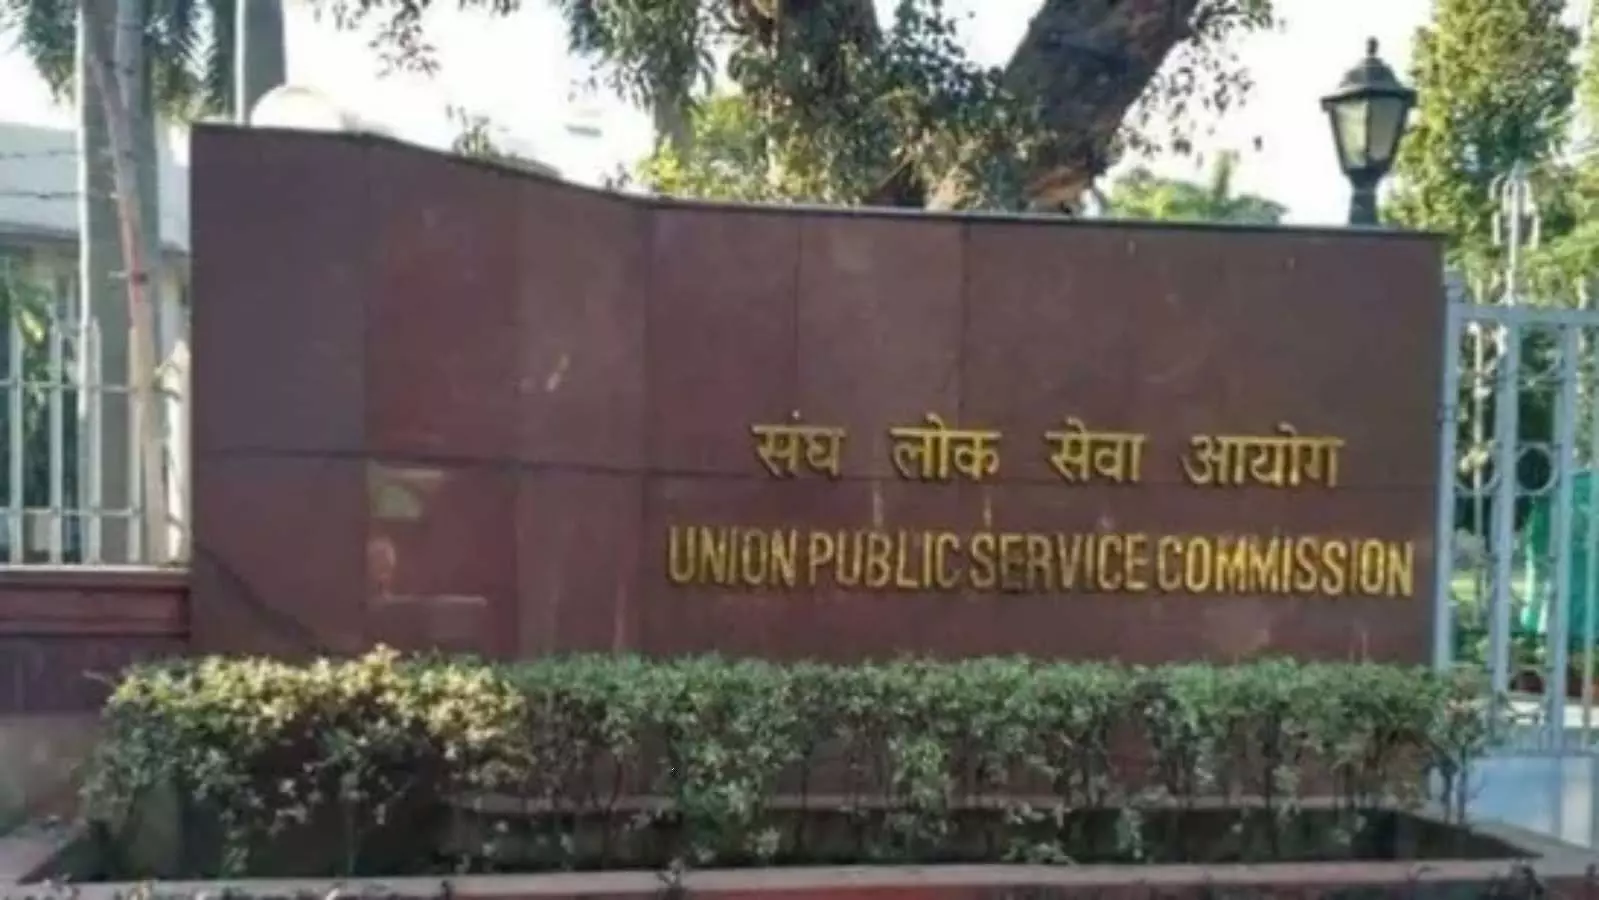 UPSC Civil Services Mains Result 2022 expected soon upsc give these information